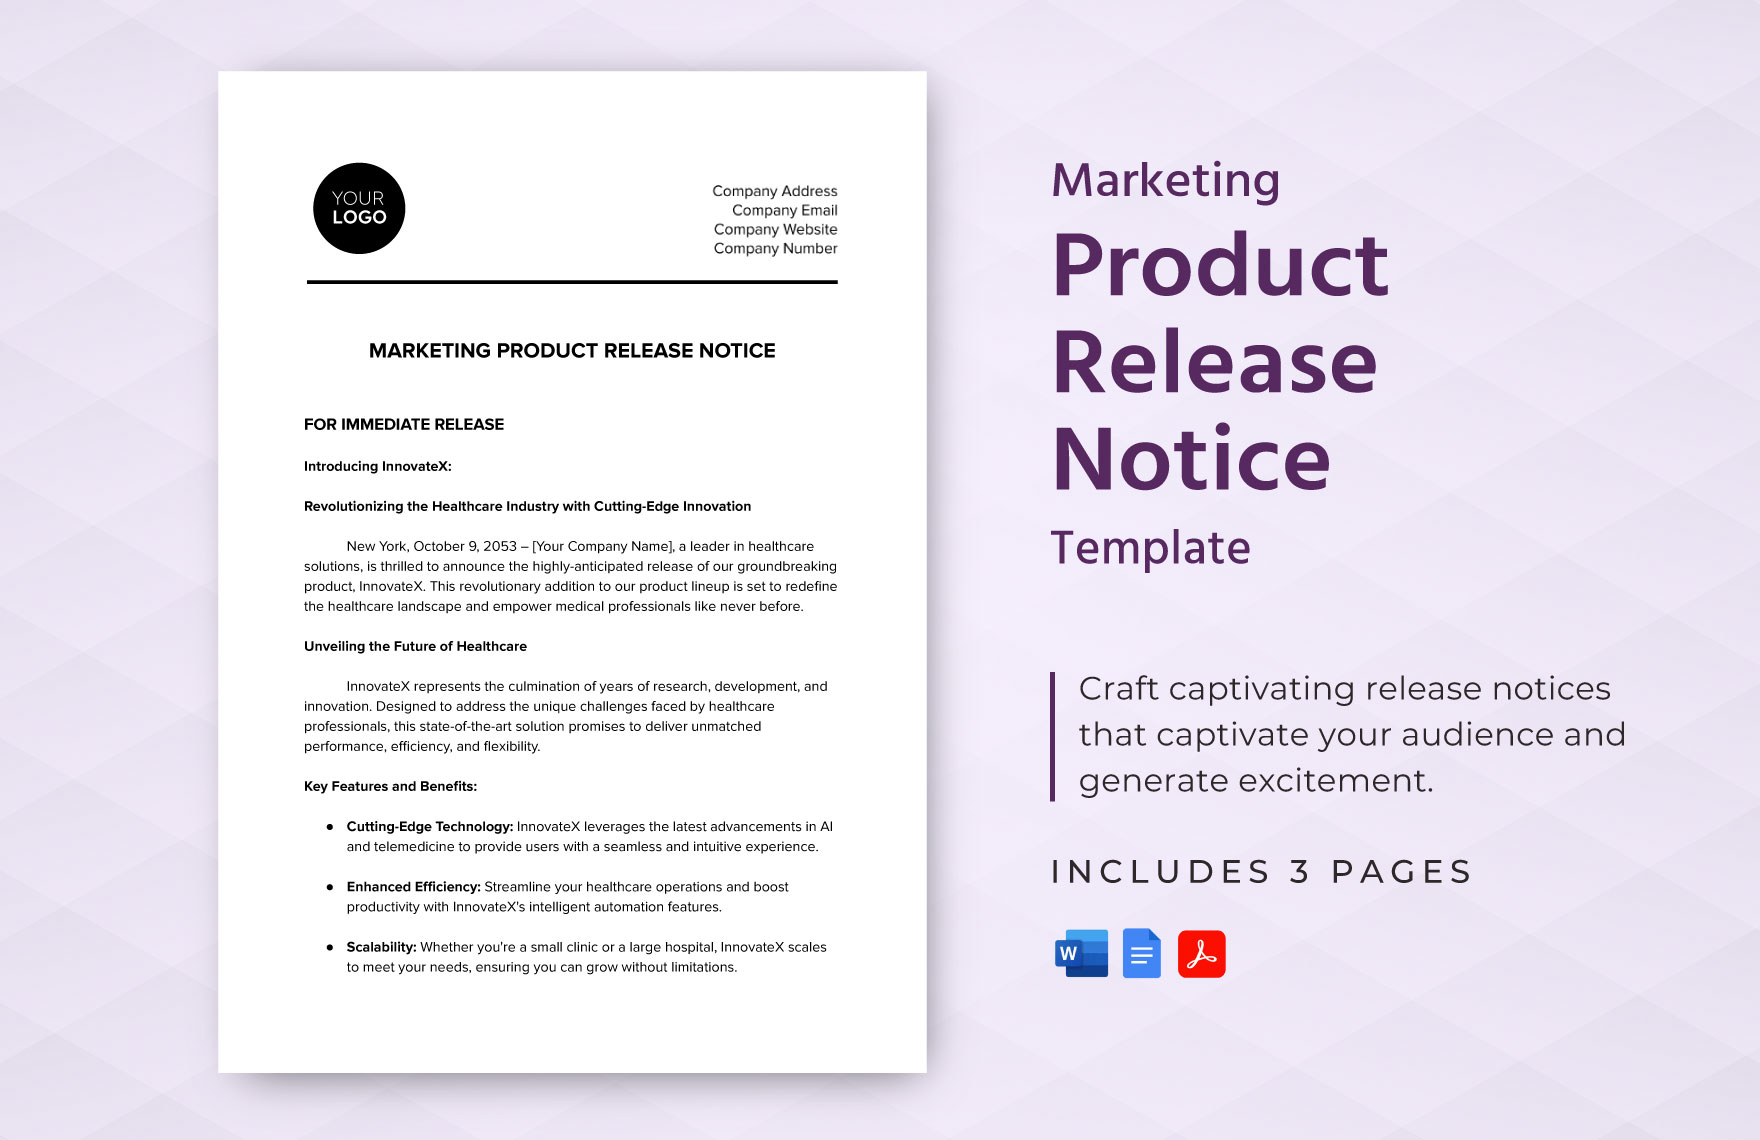 Marketing Product Release Notice Template in Word, Google Docs, PDF